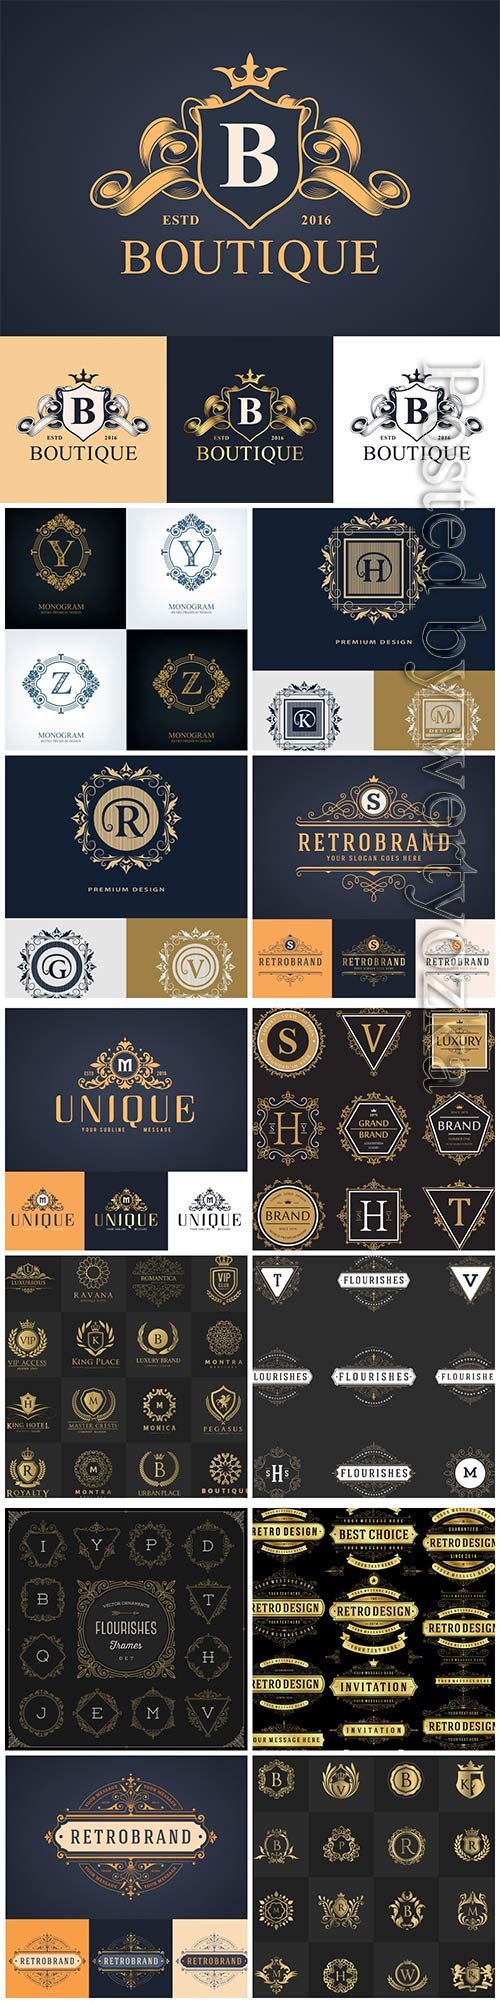 Logos, badges and design elements in vector